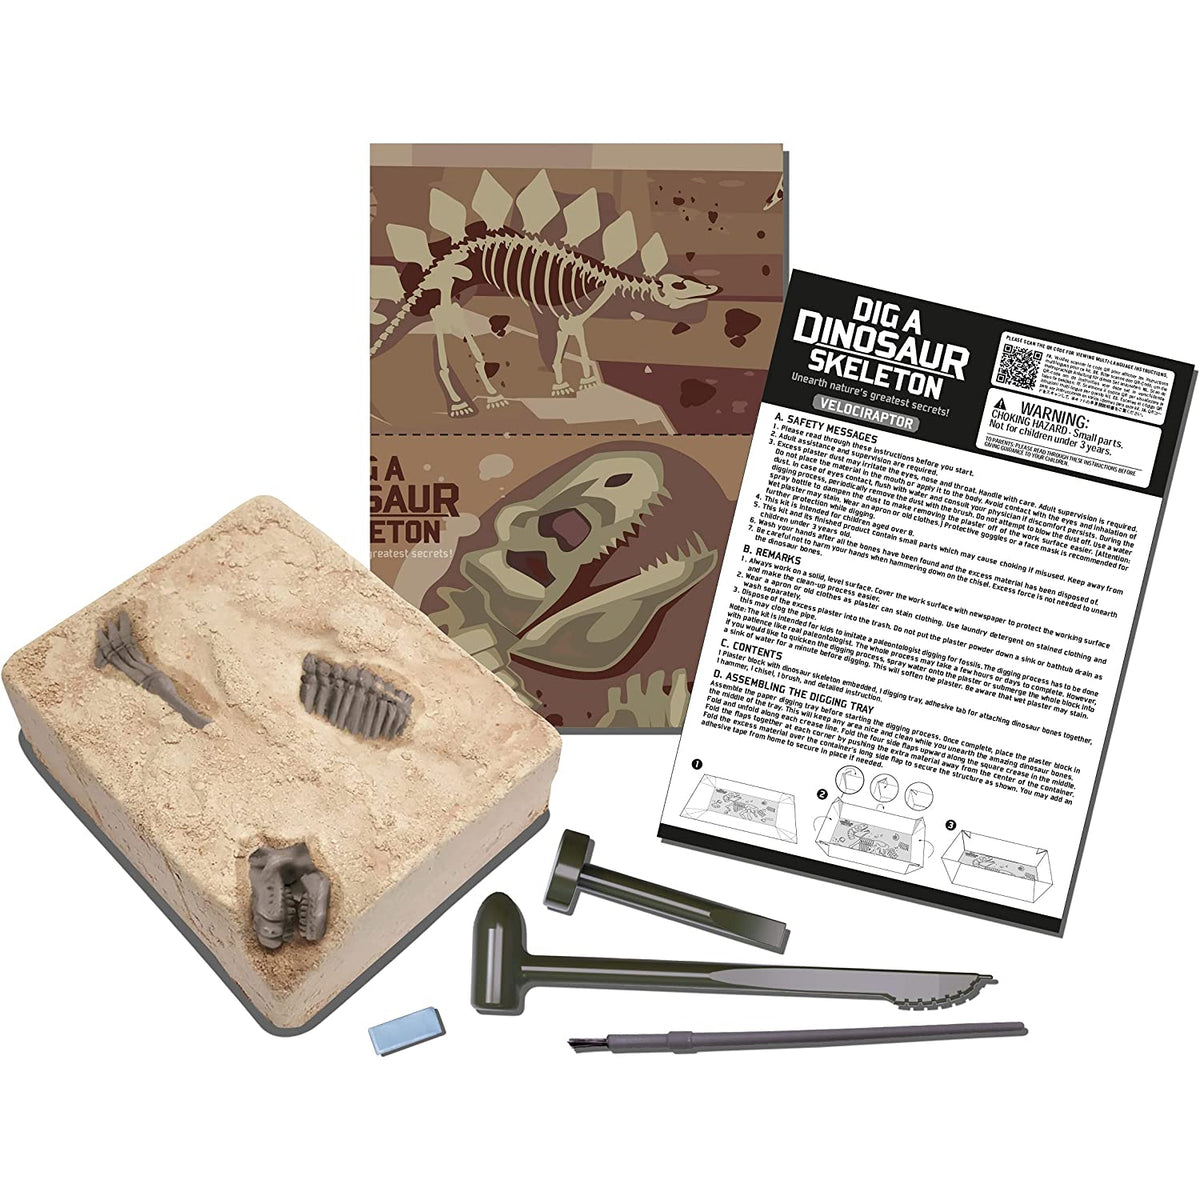 Front view of contents of Dig A Dinosaur Skeleton Velociraptor showing tools, directions, the plaster block, and paper digging tray.